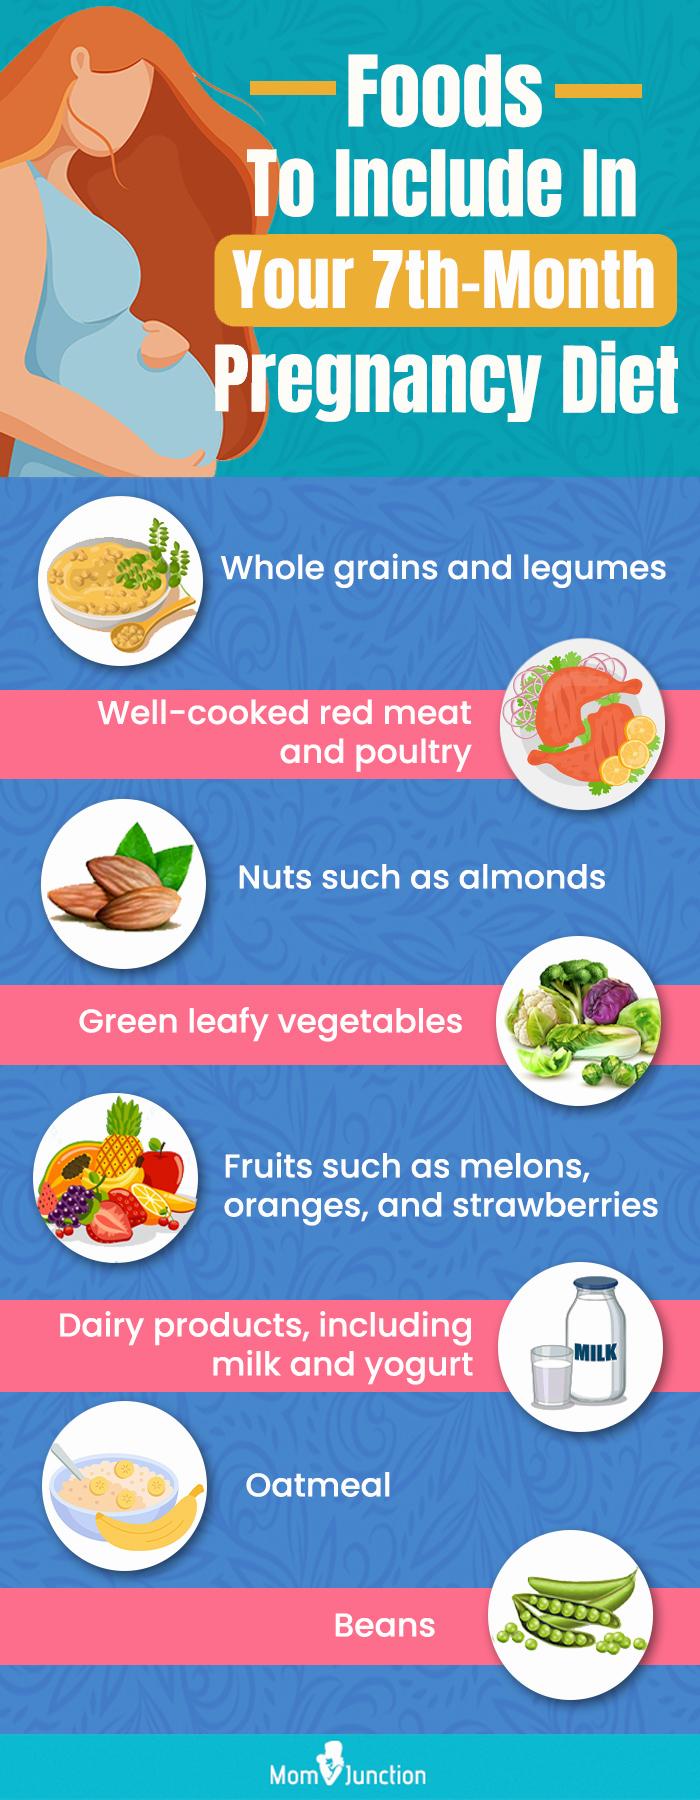 A pregnant woman should eat a balanced diet that includes whole grains and legumes, well-cooked red meat and poultry, nuts such as almonds, green leafy vegetables, fruits such as melons, oranges, and strawberries, dairy products including milk and yogurt, oatmeal, and beans.